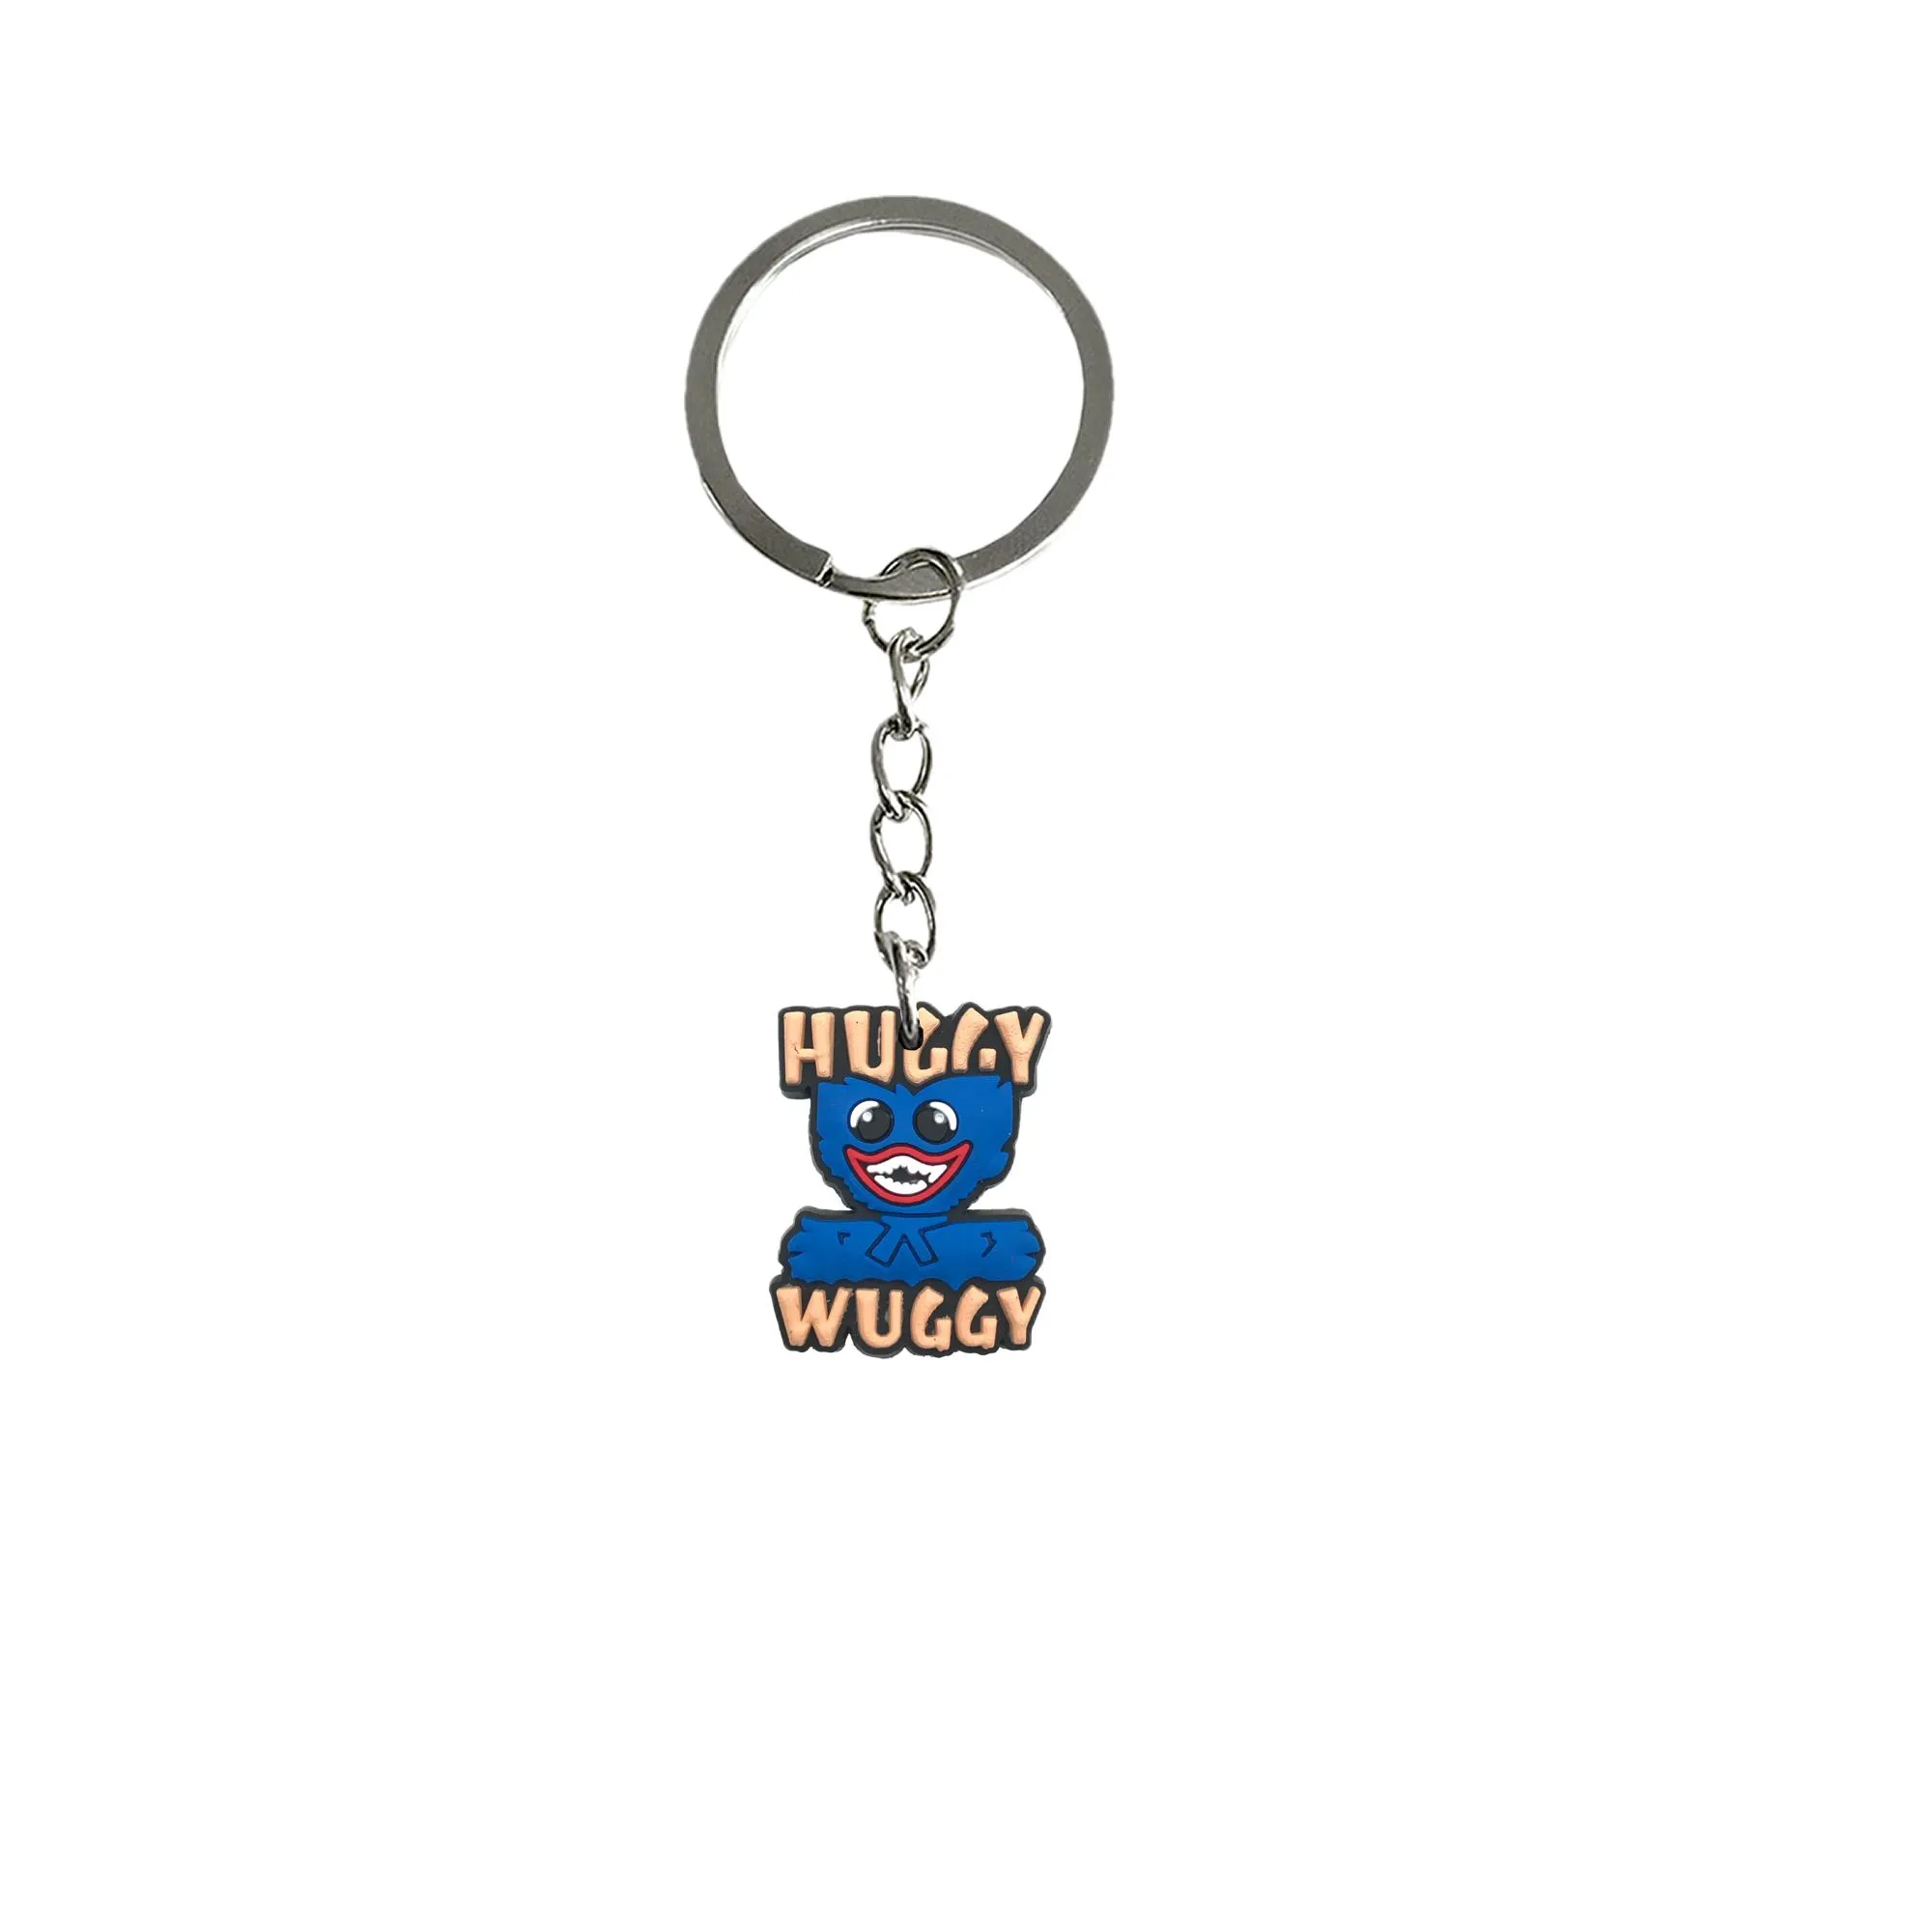 huggy wuggy keychain key rings goodie bag stuffers supplies anime cool keychains for backpacks keyring suitable schoolbag purse handbag charms women chain girls ring